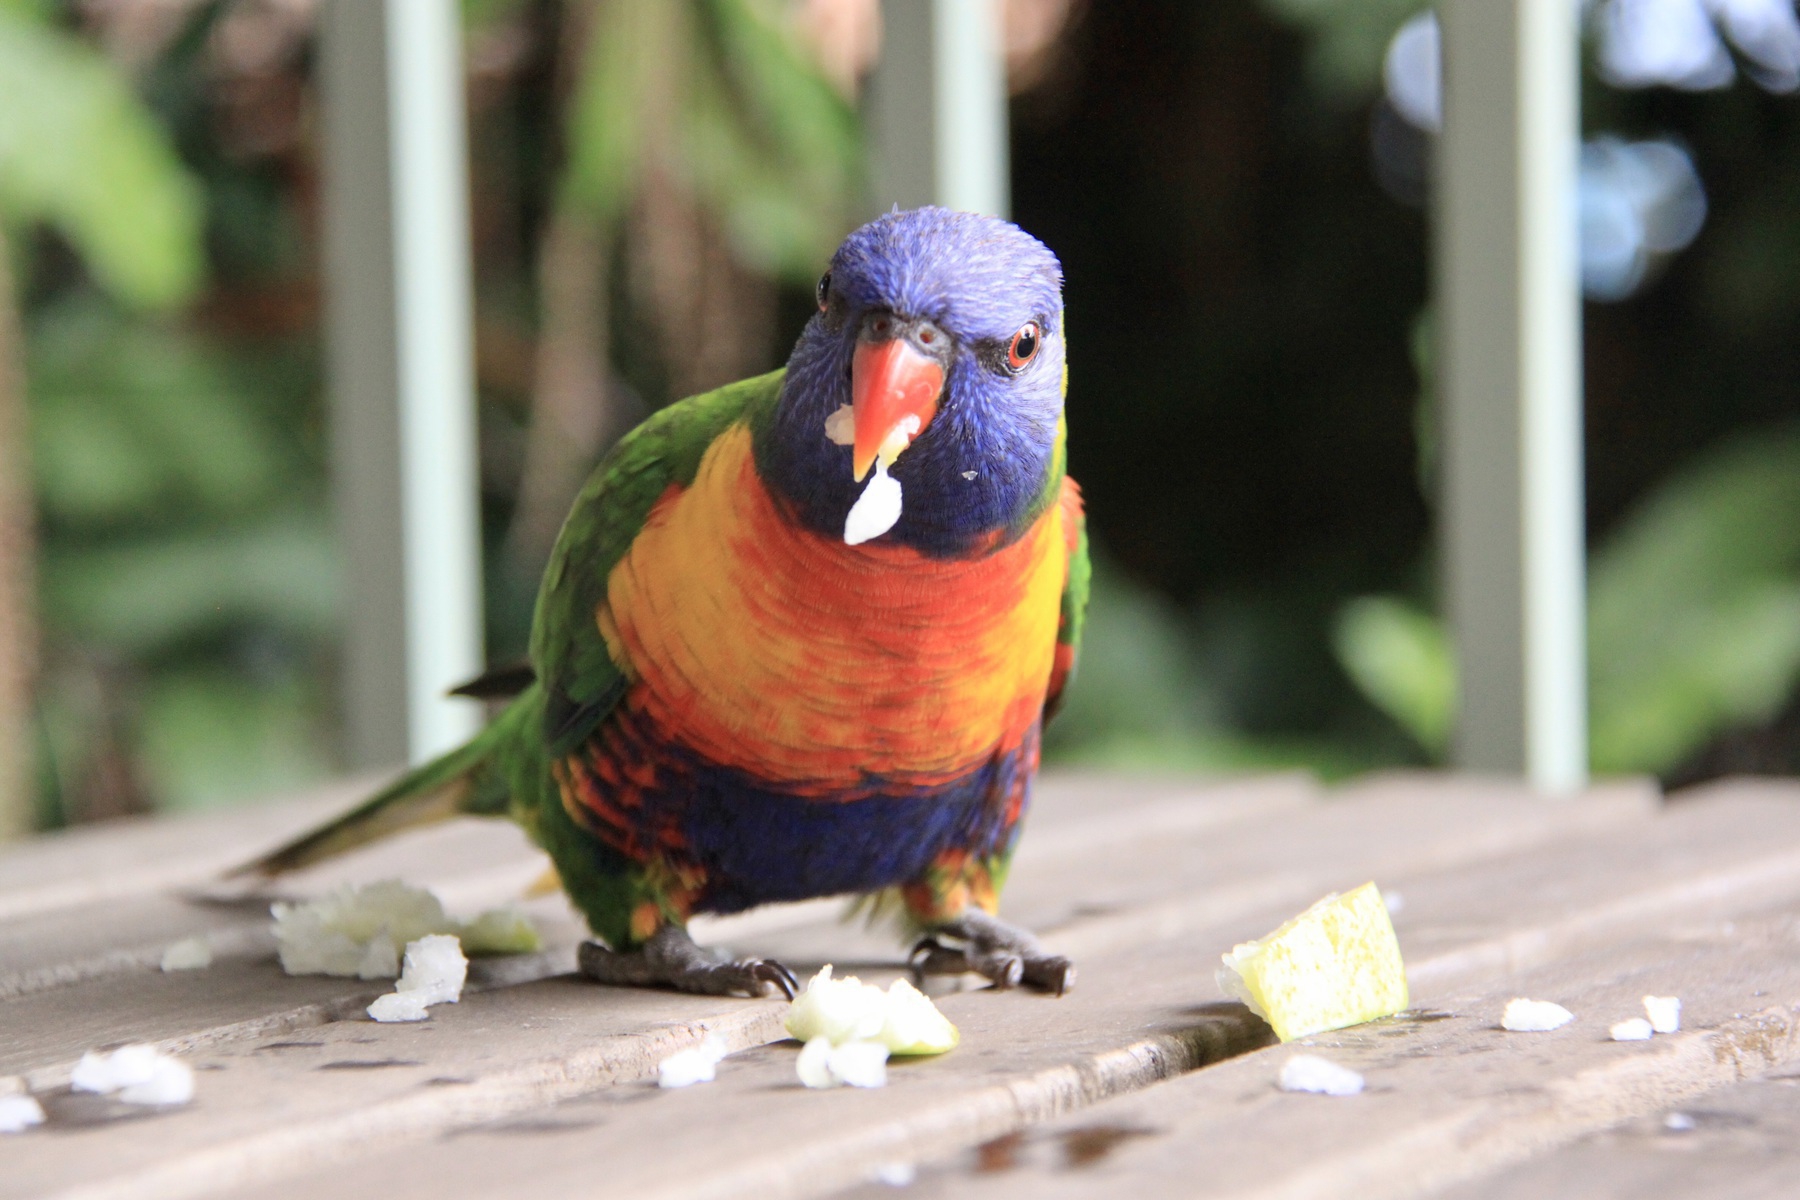 A rainbow lorikeet looks directly at the camera with a piece if pear in its beak while on an outdoor setting with a railing and macadamia tree in the background